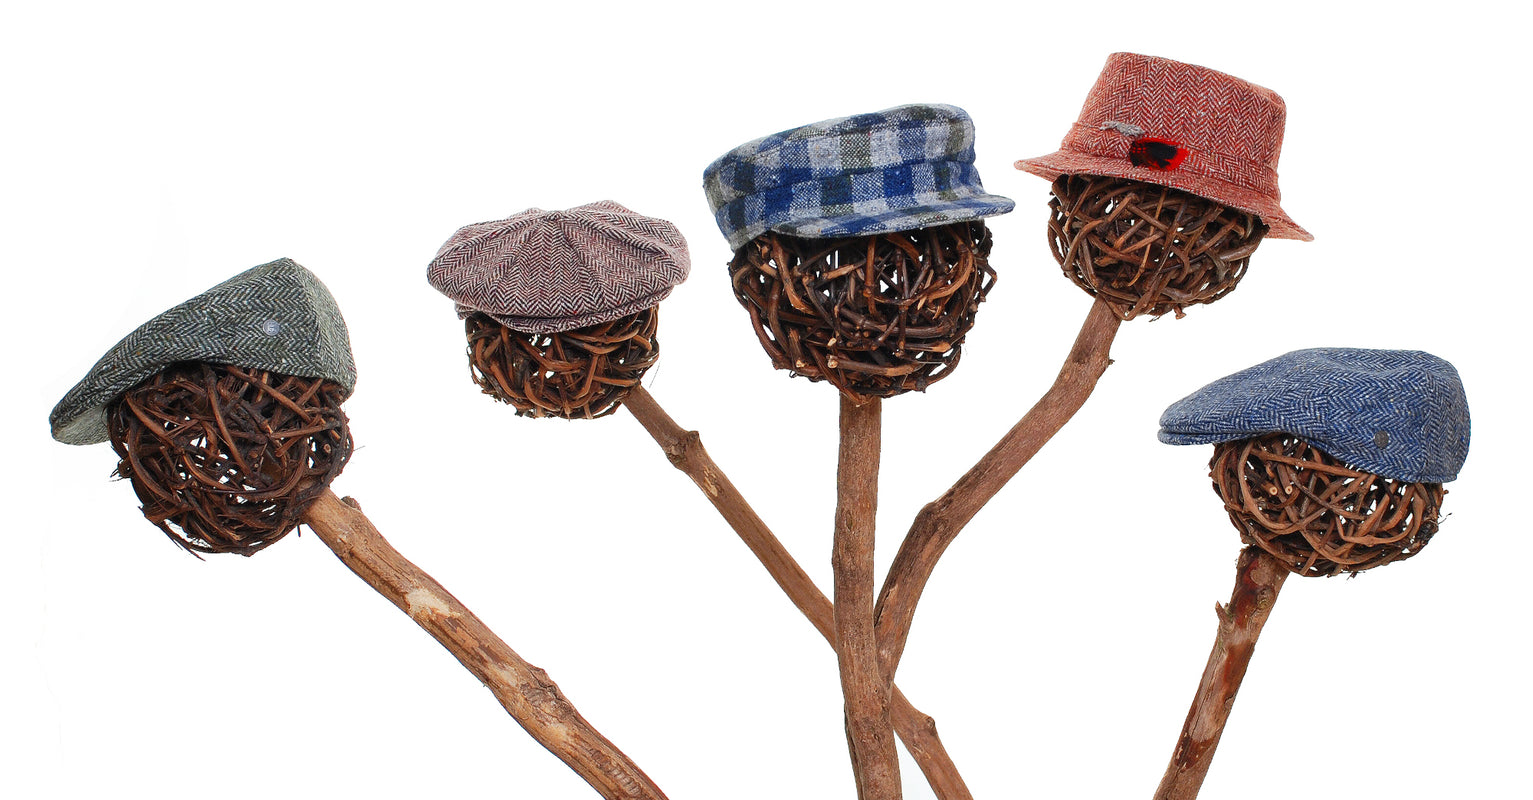 hata donegal, tweed caps, donegal tweed, tweed, tweed.ie